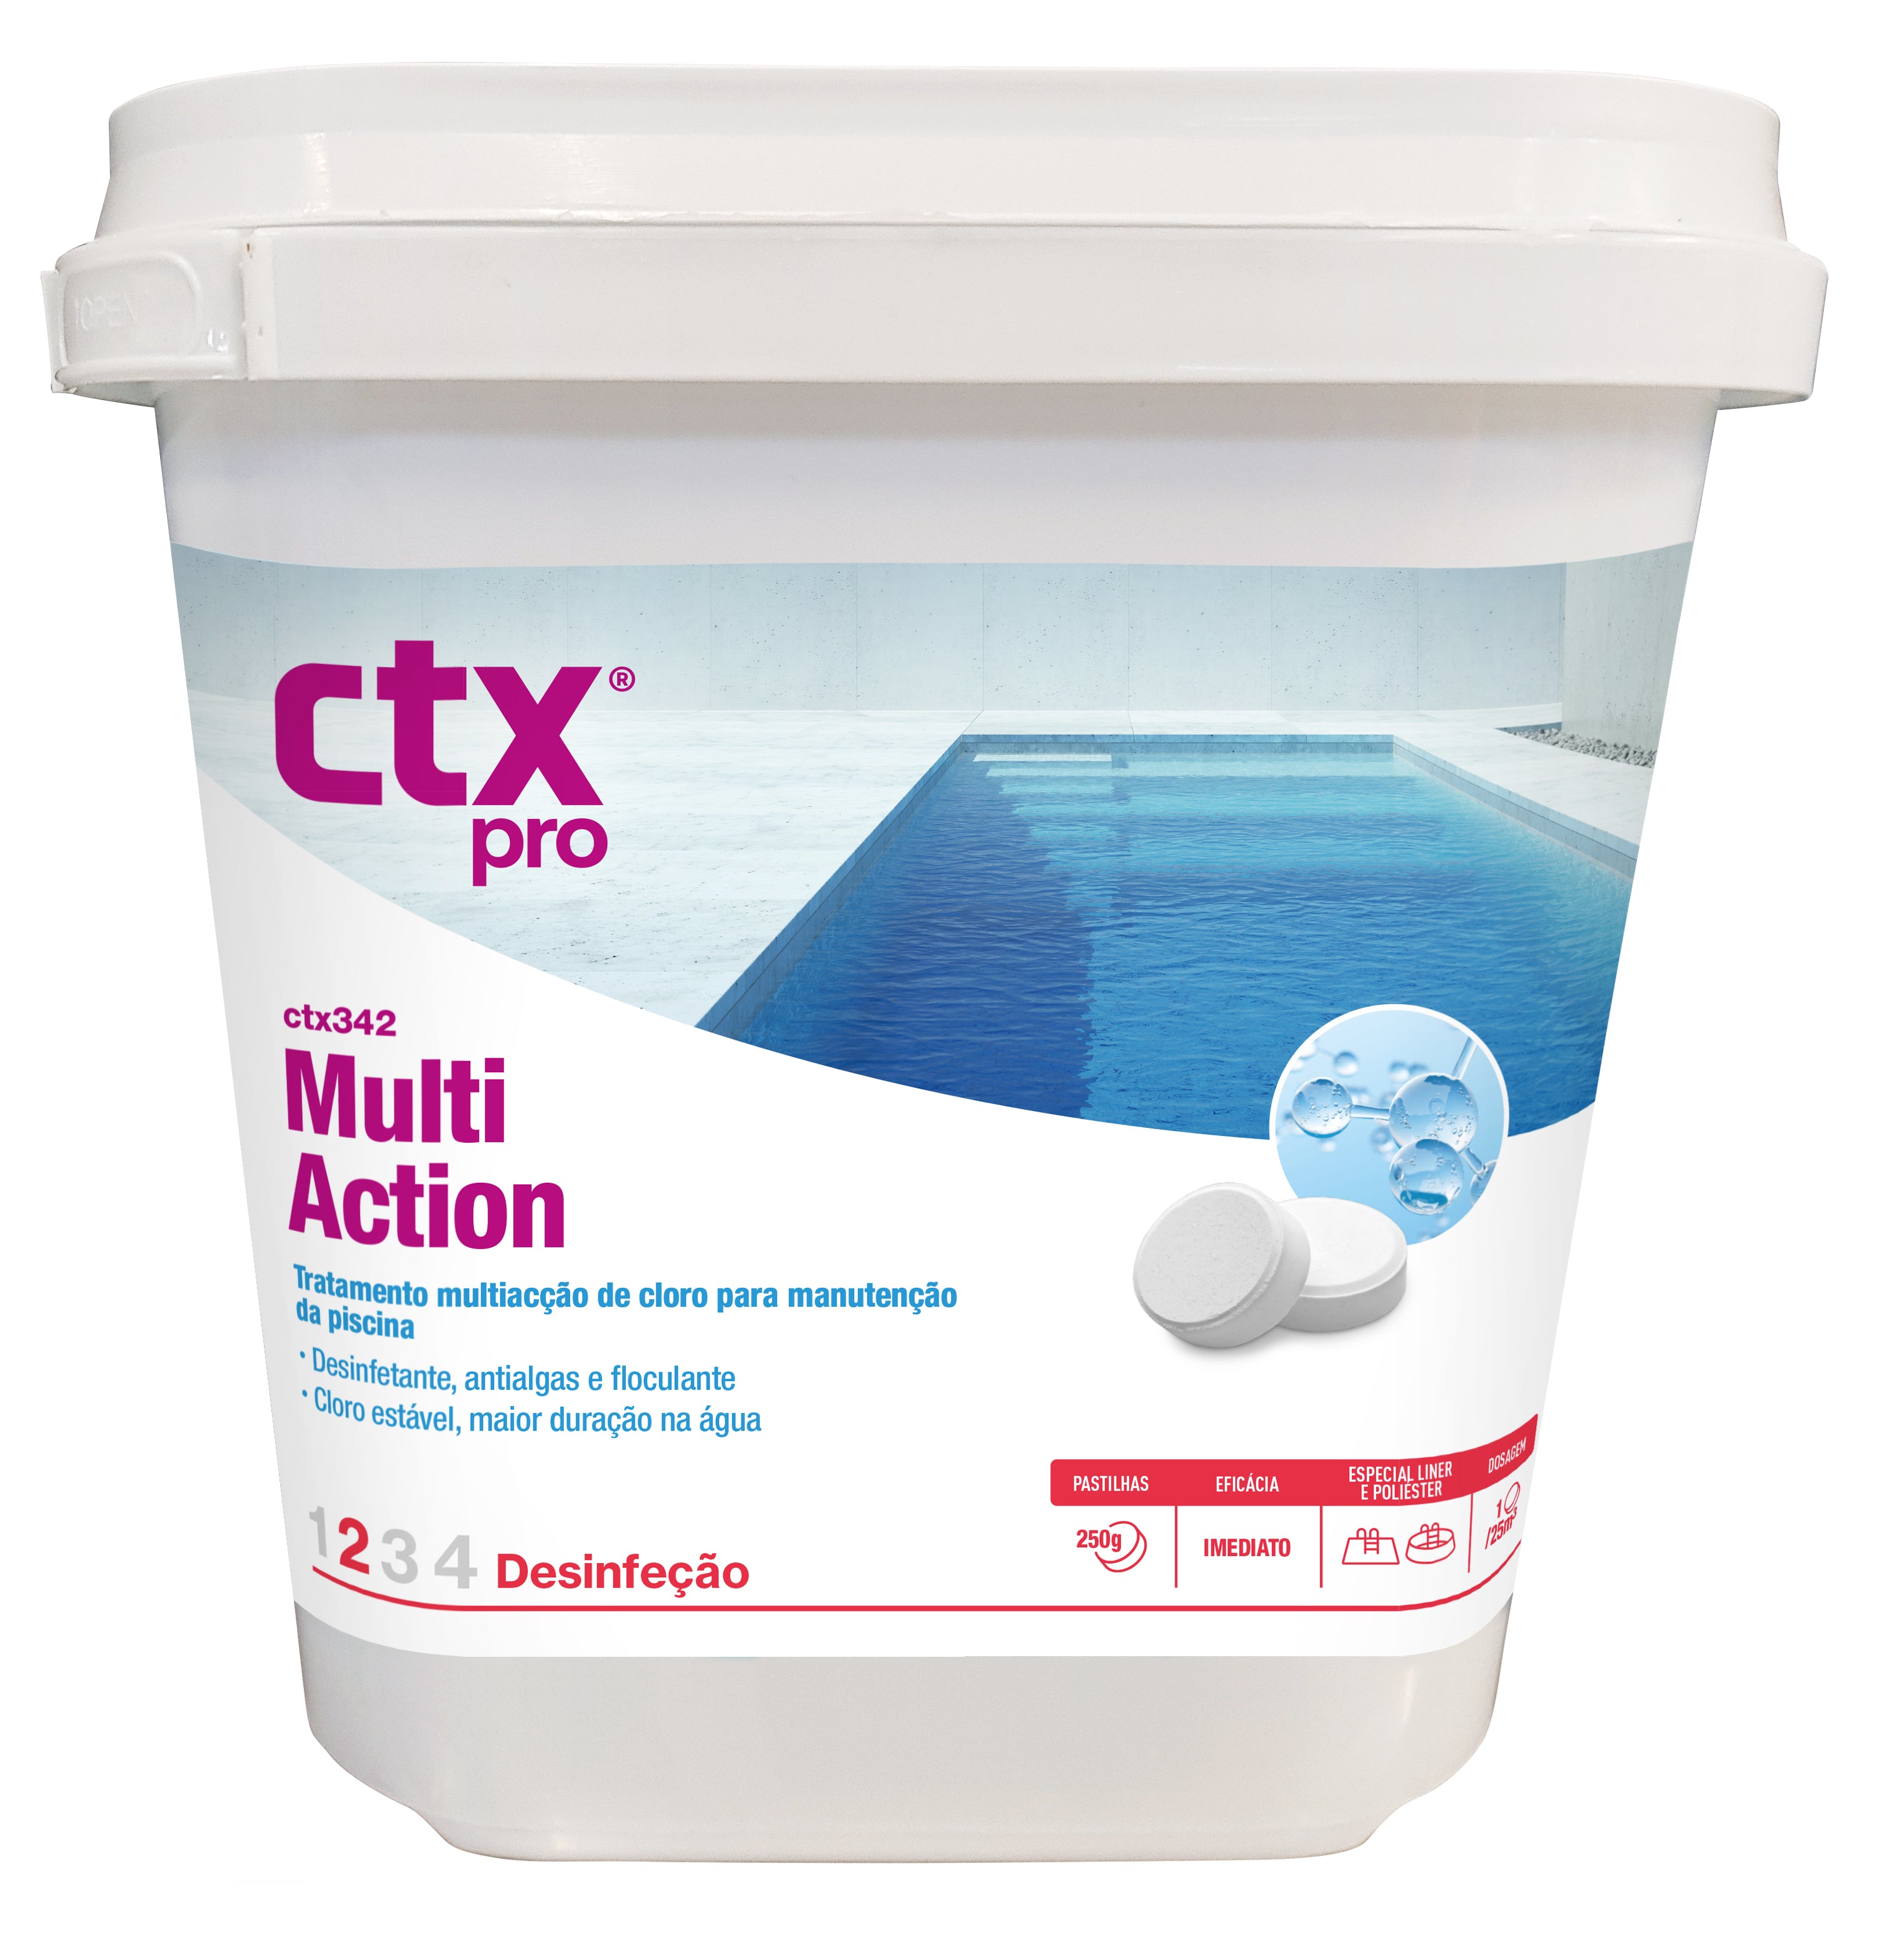 CTX-342 Multiaction Tablets 200gr (Special Liner und Faser-Polyester)